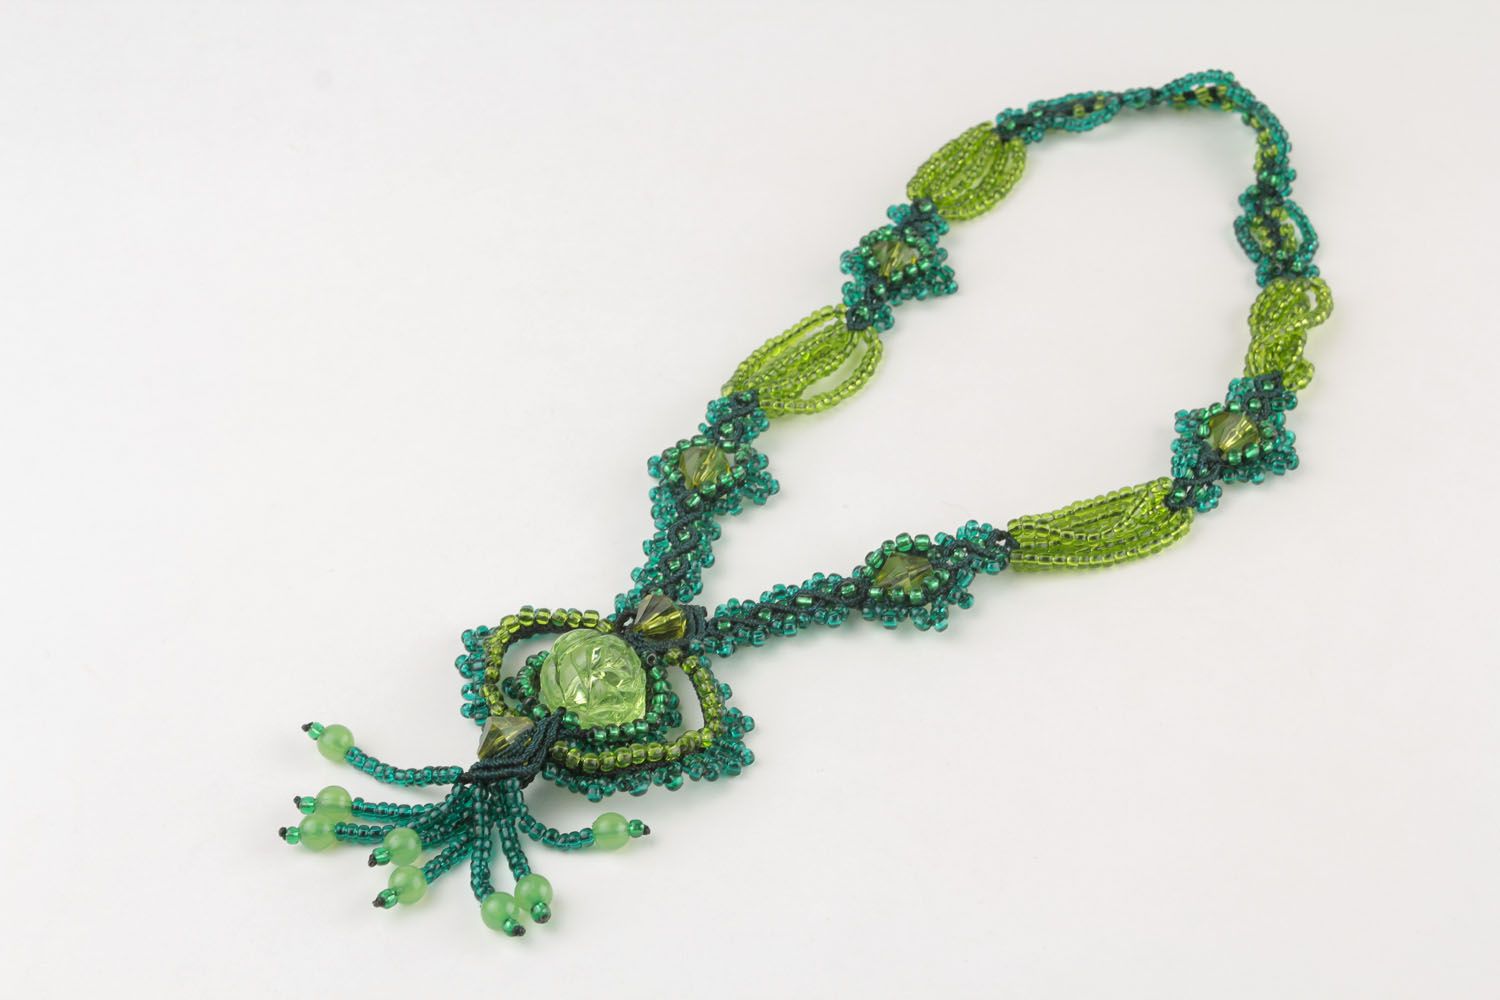 Homemade necklace woven of beads and threads photo 3